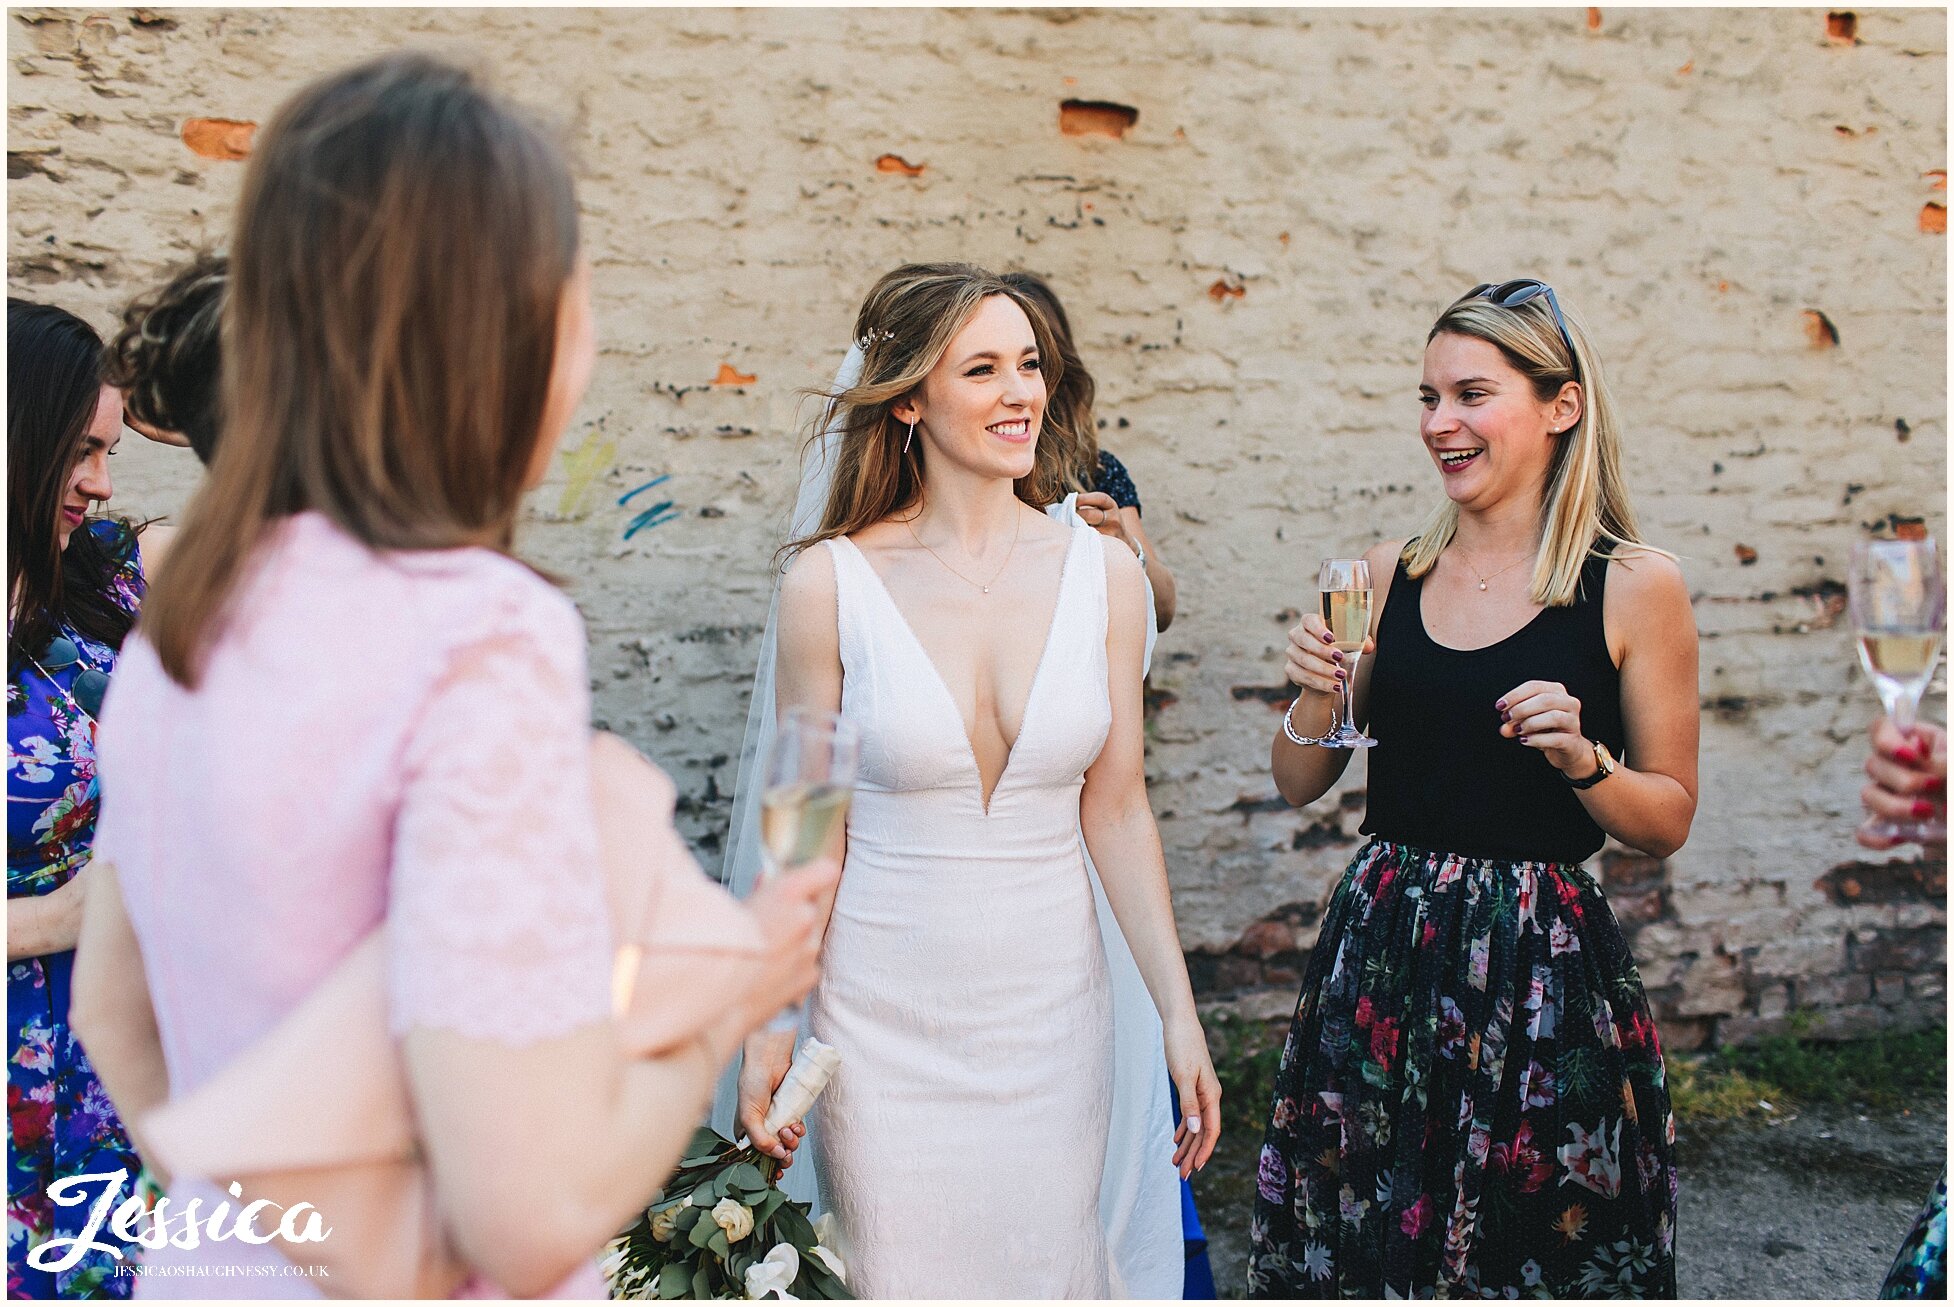 bride laughs with her friends at her wedding reception